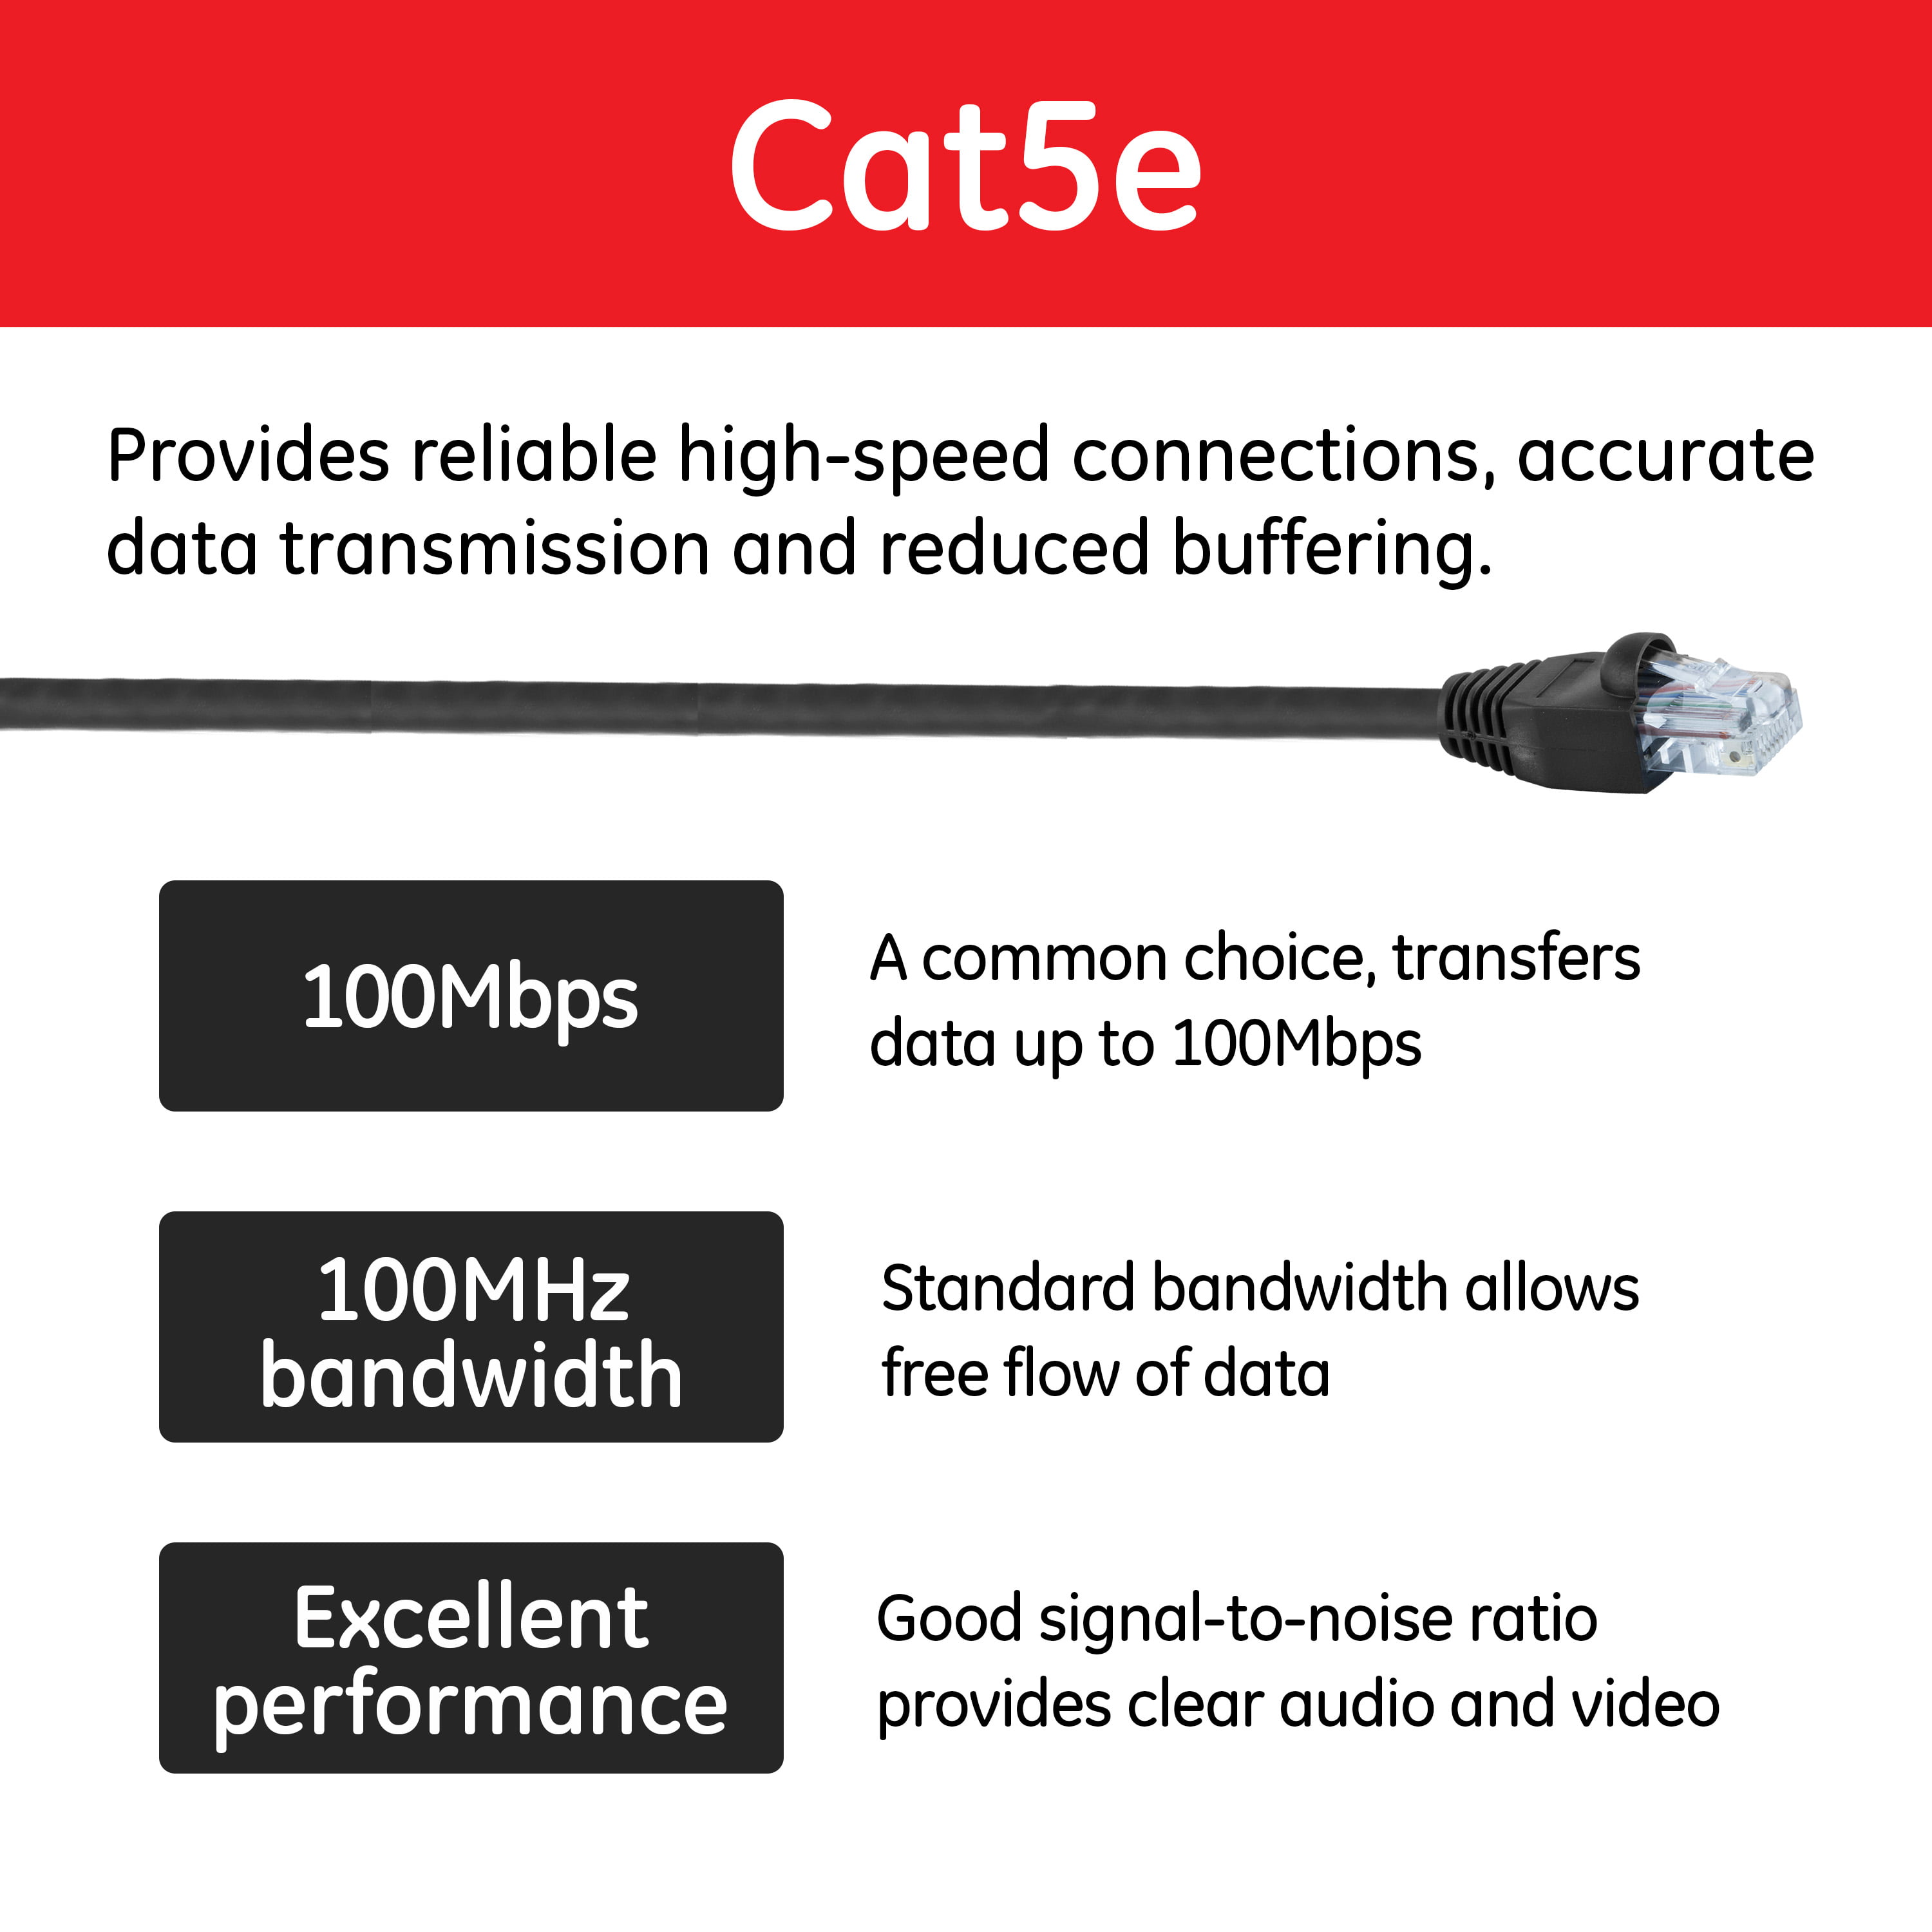 50Ft Ethernet Cable Black for Home or Office GE Cat5E Ethernet Cable 100MB/Sec for High Speed Internet Devices Video RJ45 Connectors 33765 Audio Streaming Devices 